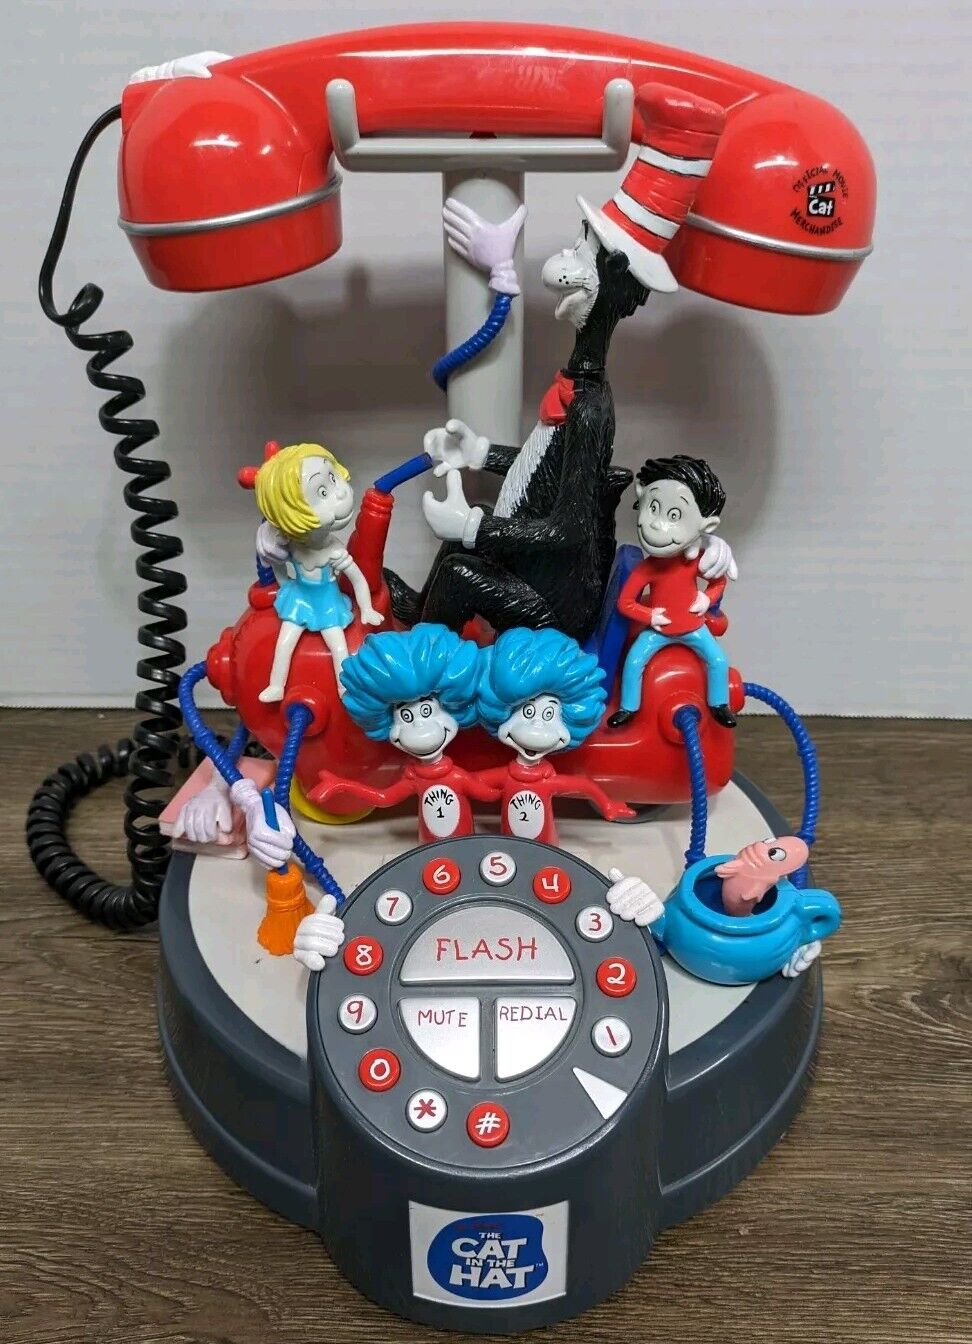 Vintage 2003 Dr Seuss Cat in the Hat Landline Phone Telephone CT-CAT Collectible